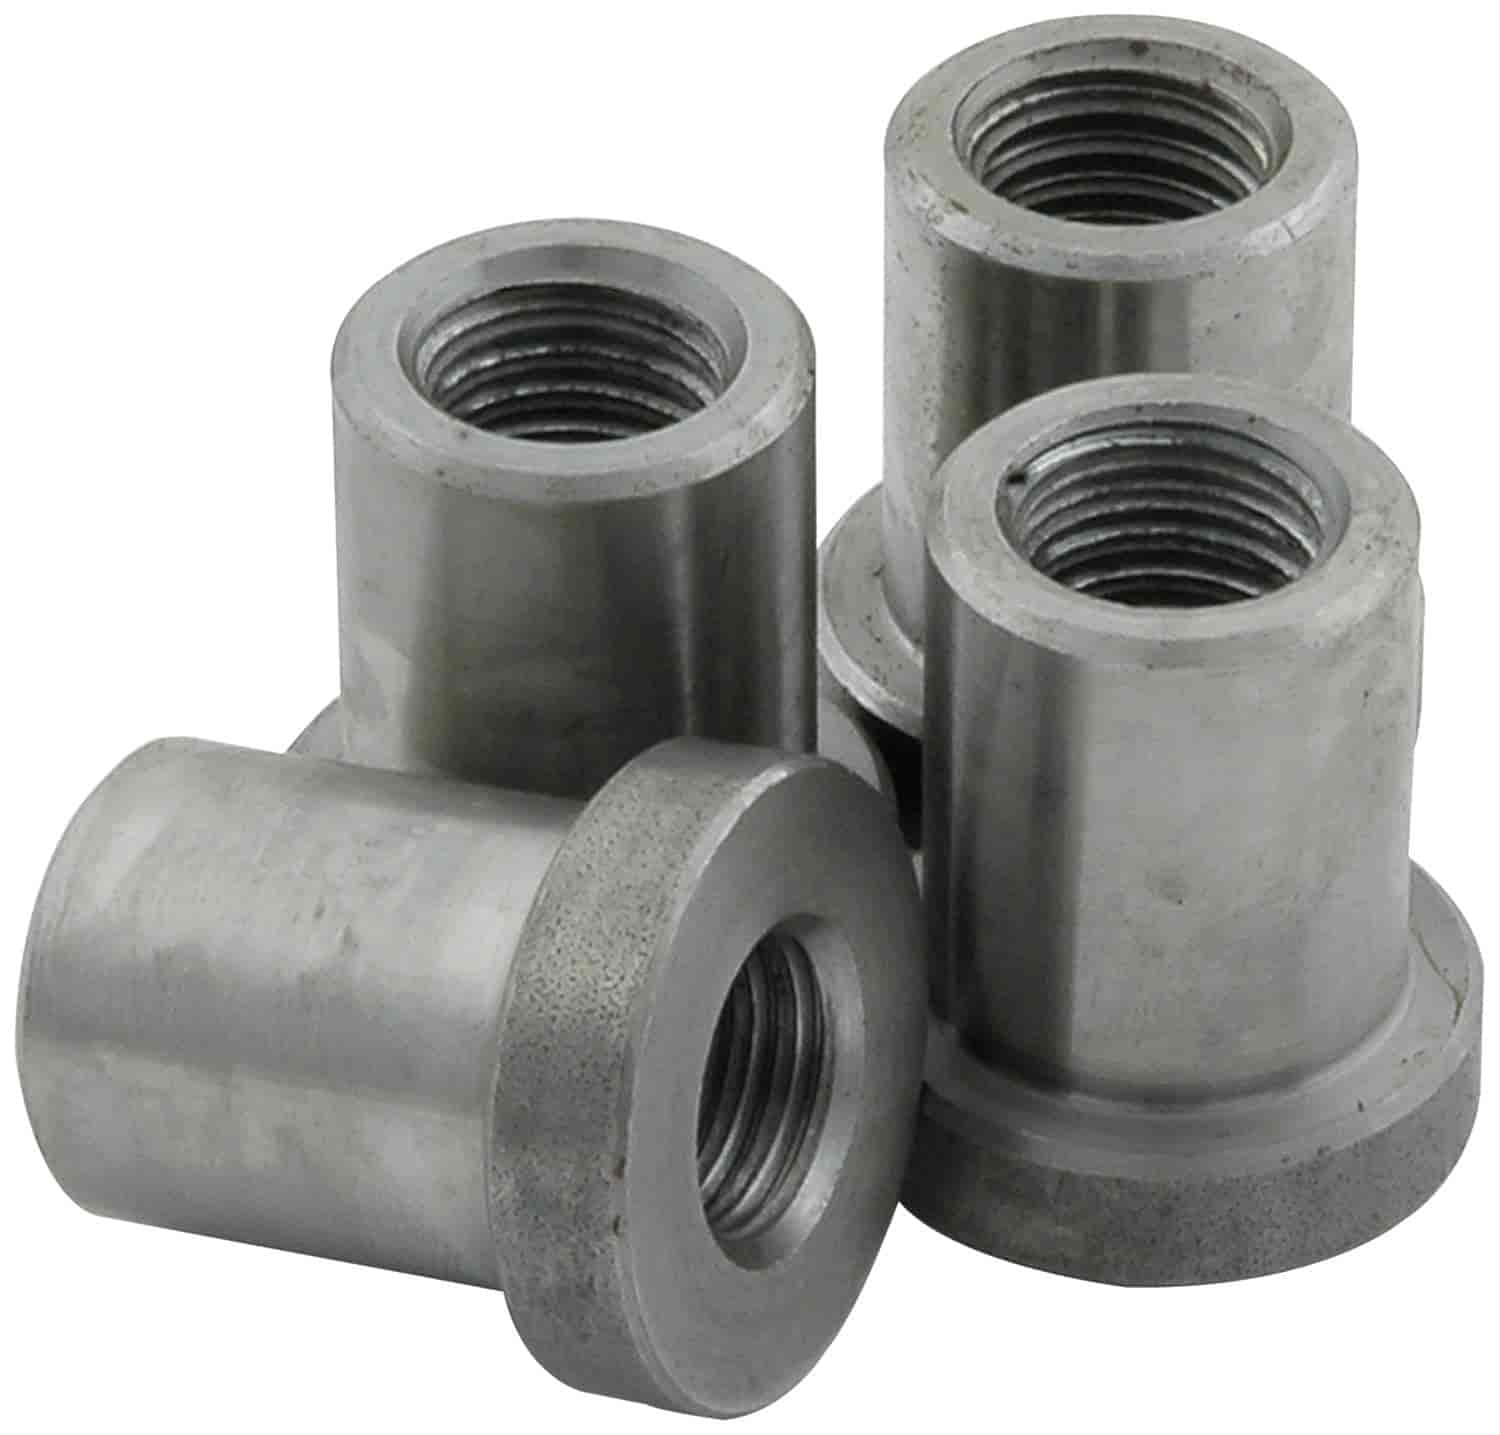 Weld-On Nuts 1/2